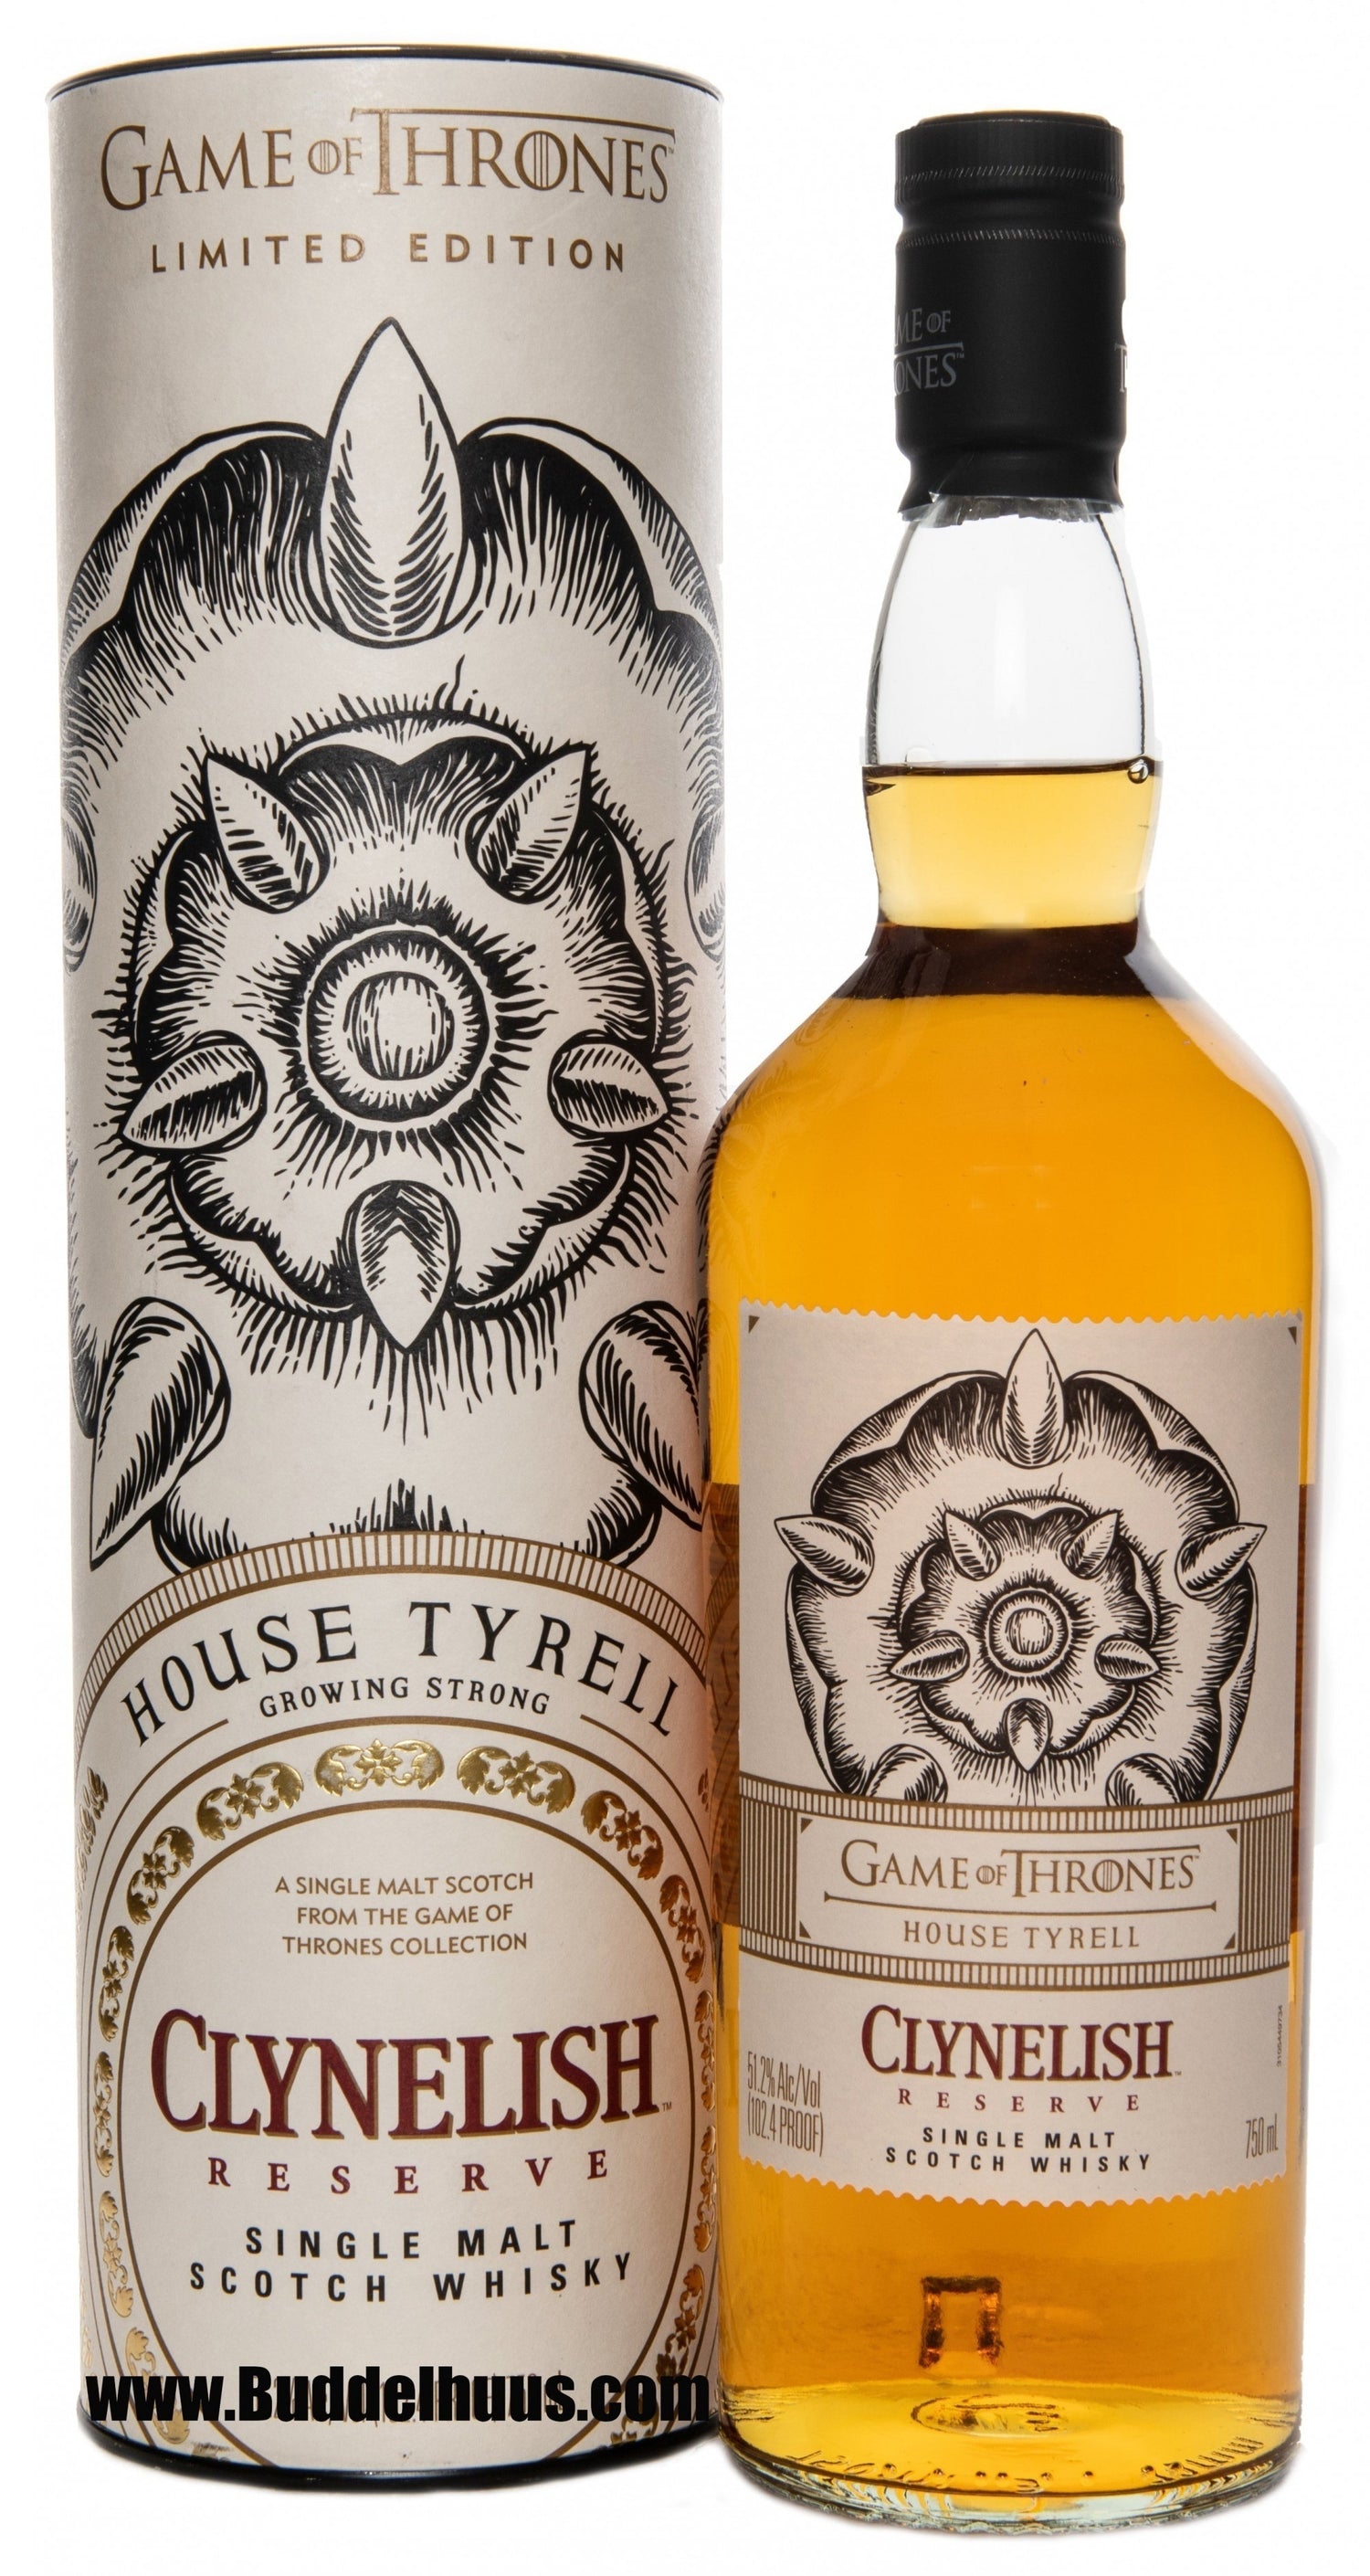 Game of Thrones Clynelish Reserve House Tyrell